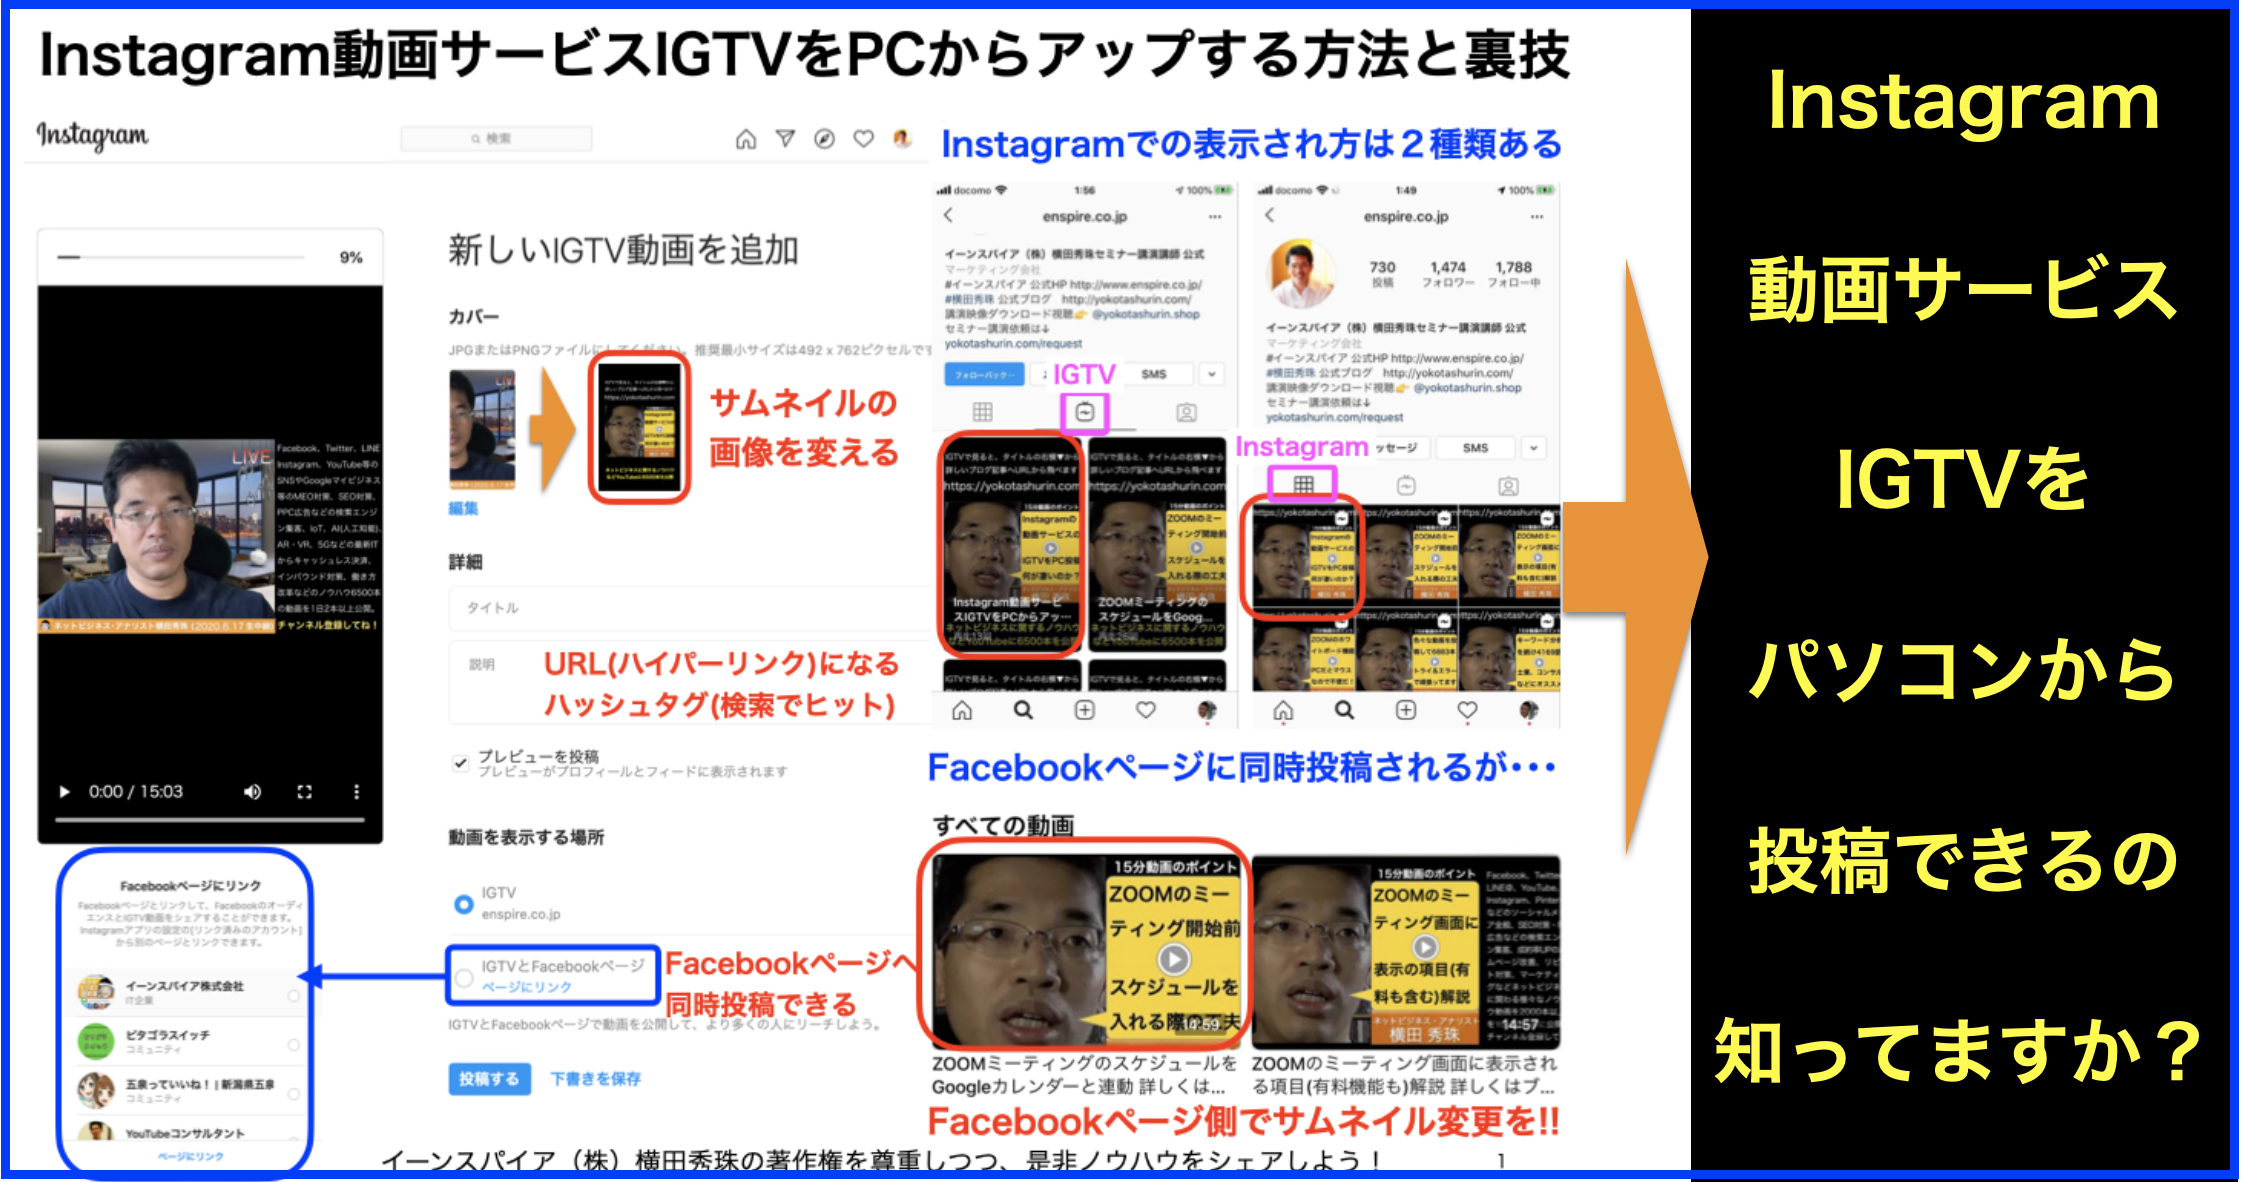 Instagram動画サービスIGTVをPCからアップする方法と裏技